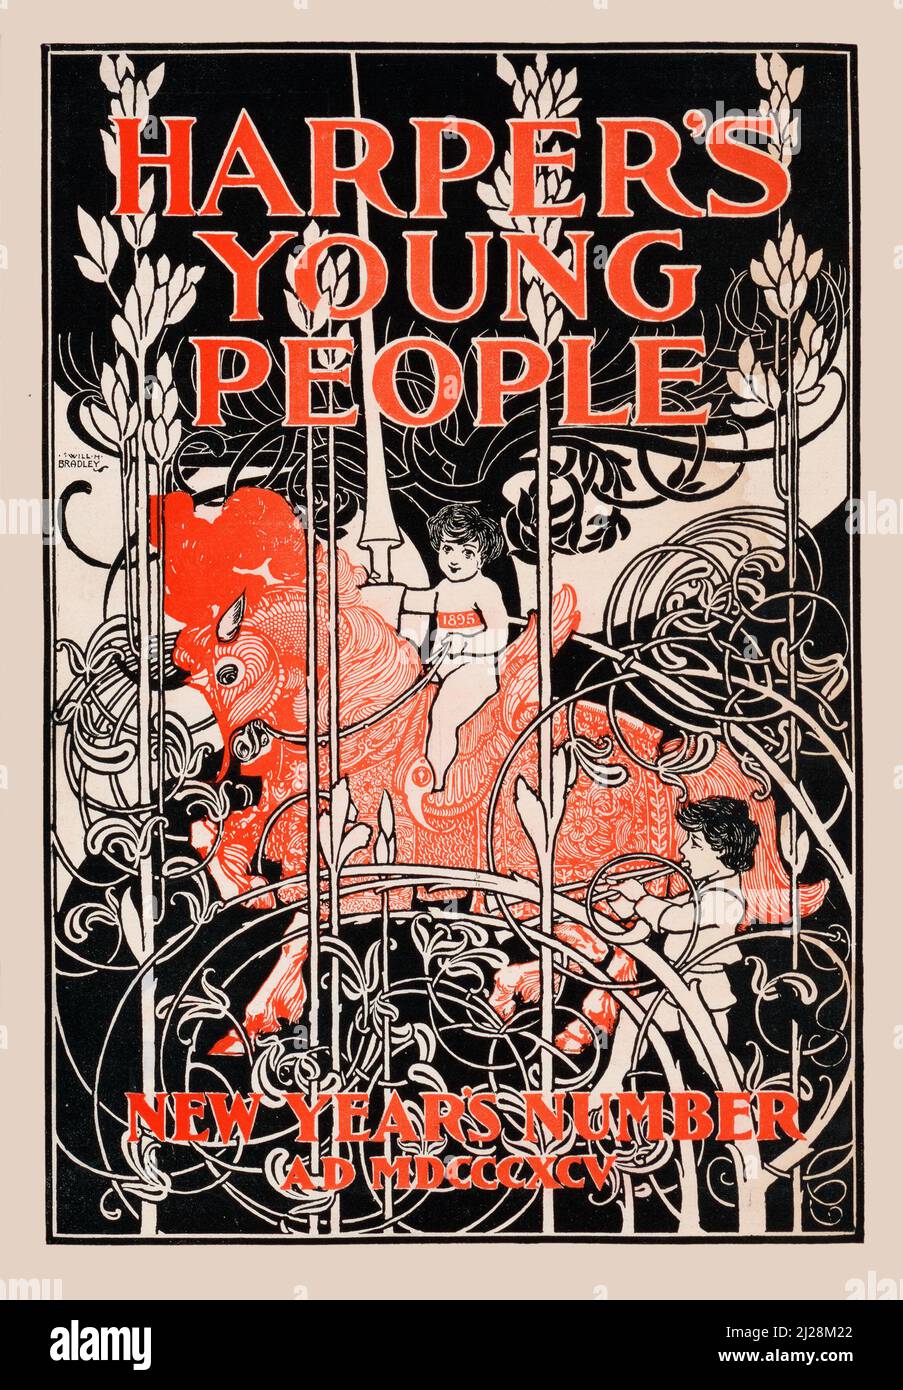 Will Bradley Artwork - Harpers Young People New Years Number (1895) American Art Nouveau - Old and vintage Poster / Magazine Cover. Stockfoto